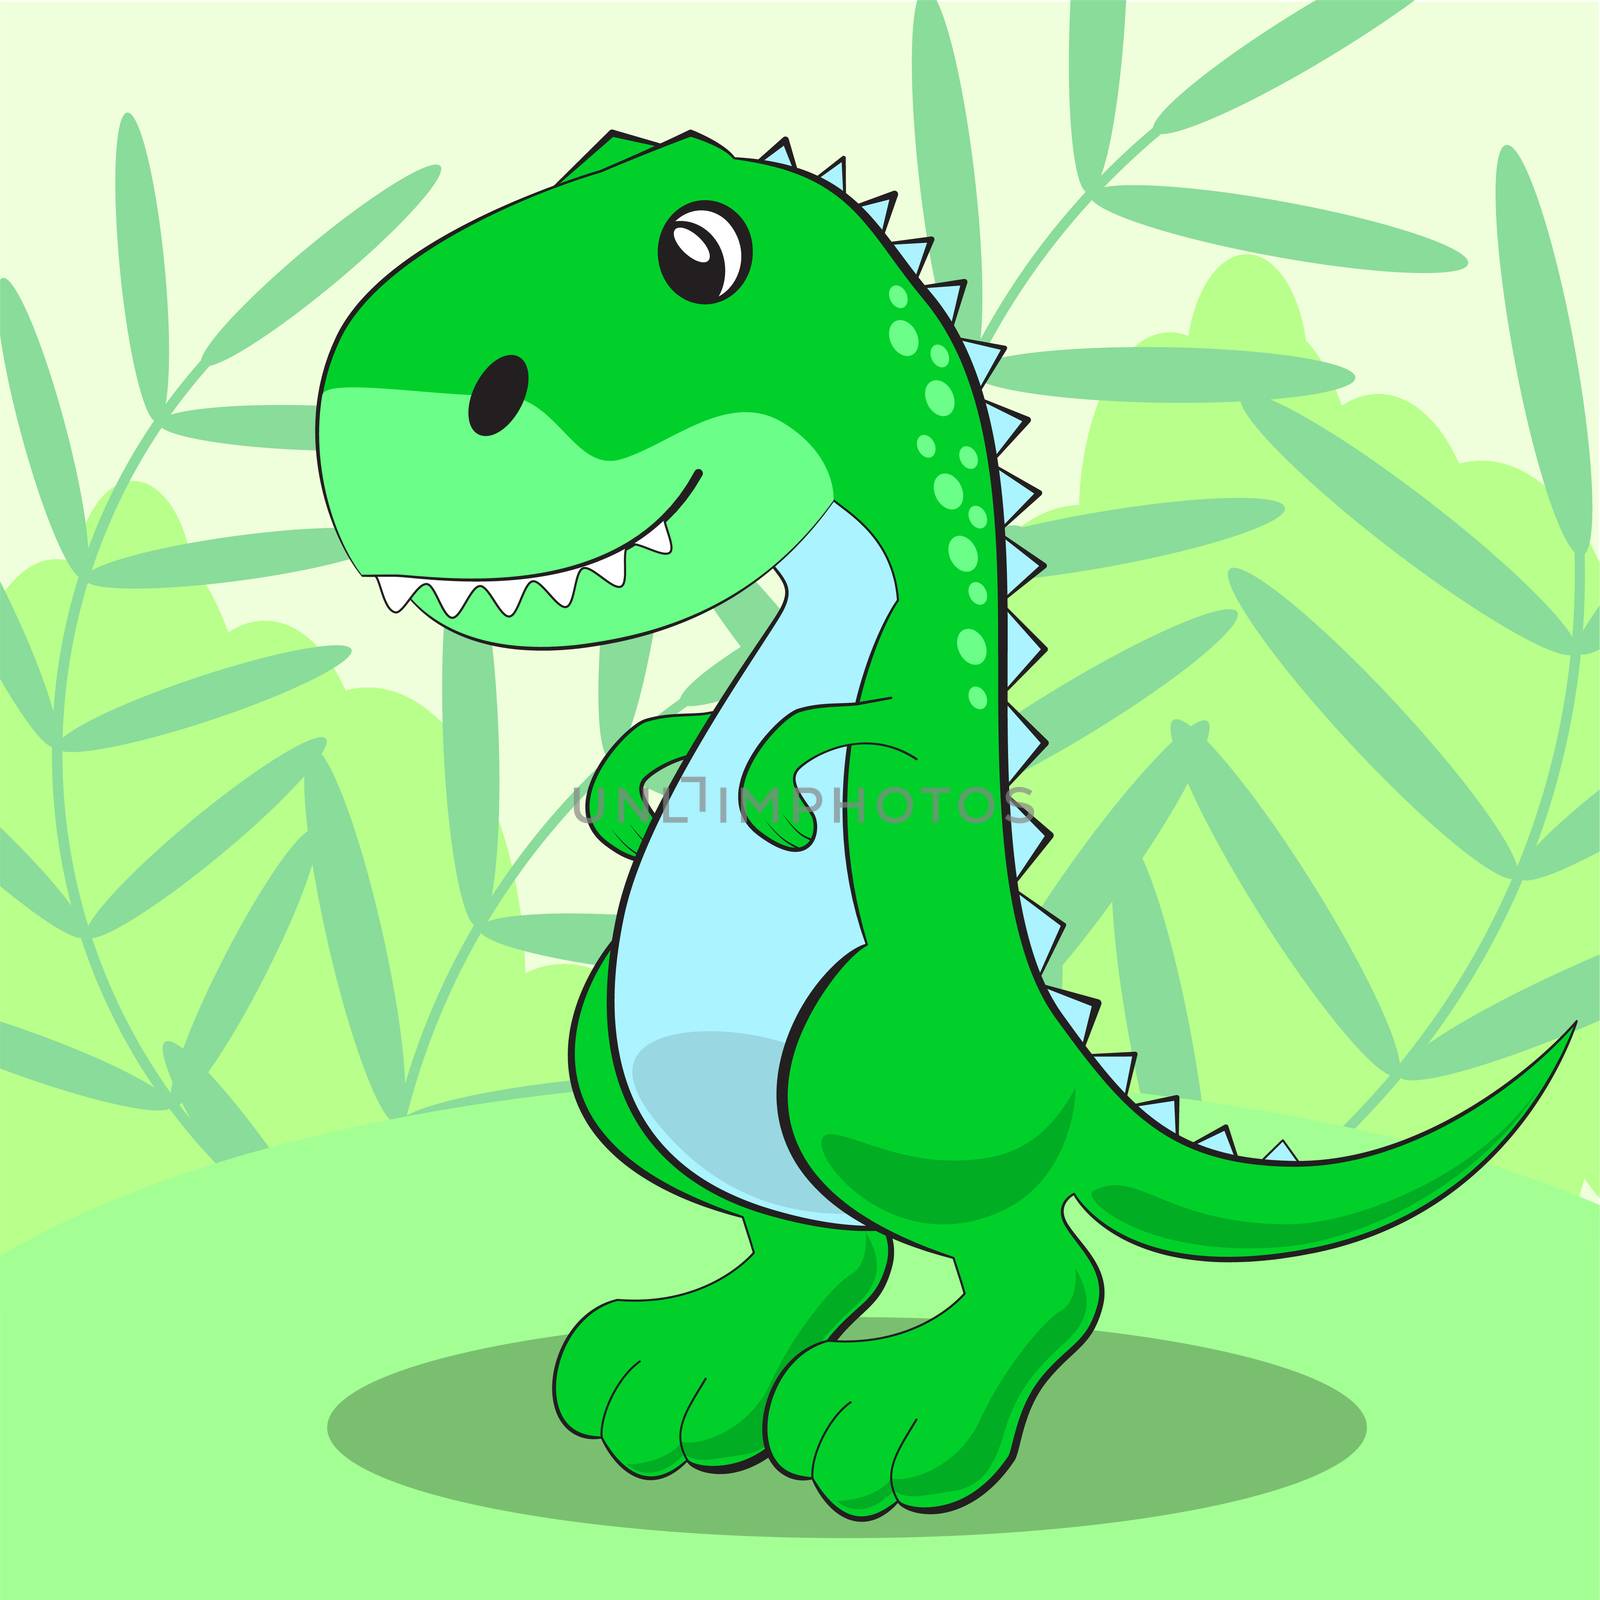 Cute dinosaur standing on a green meadow and smiling. illustration